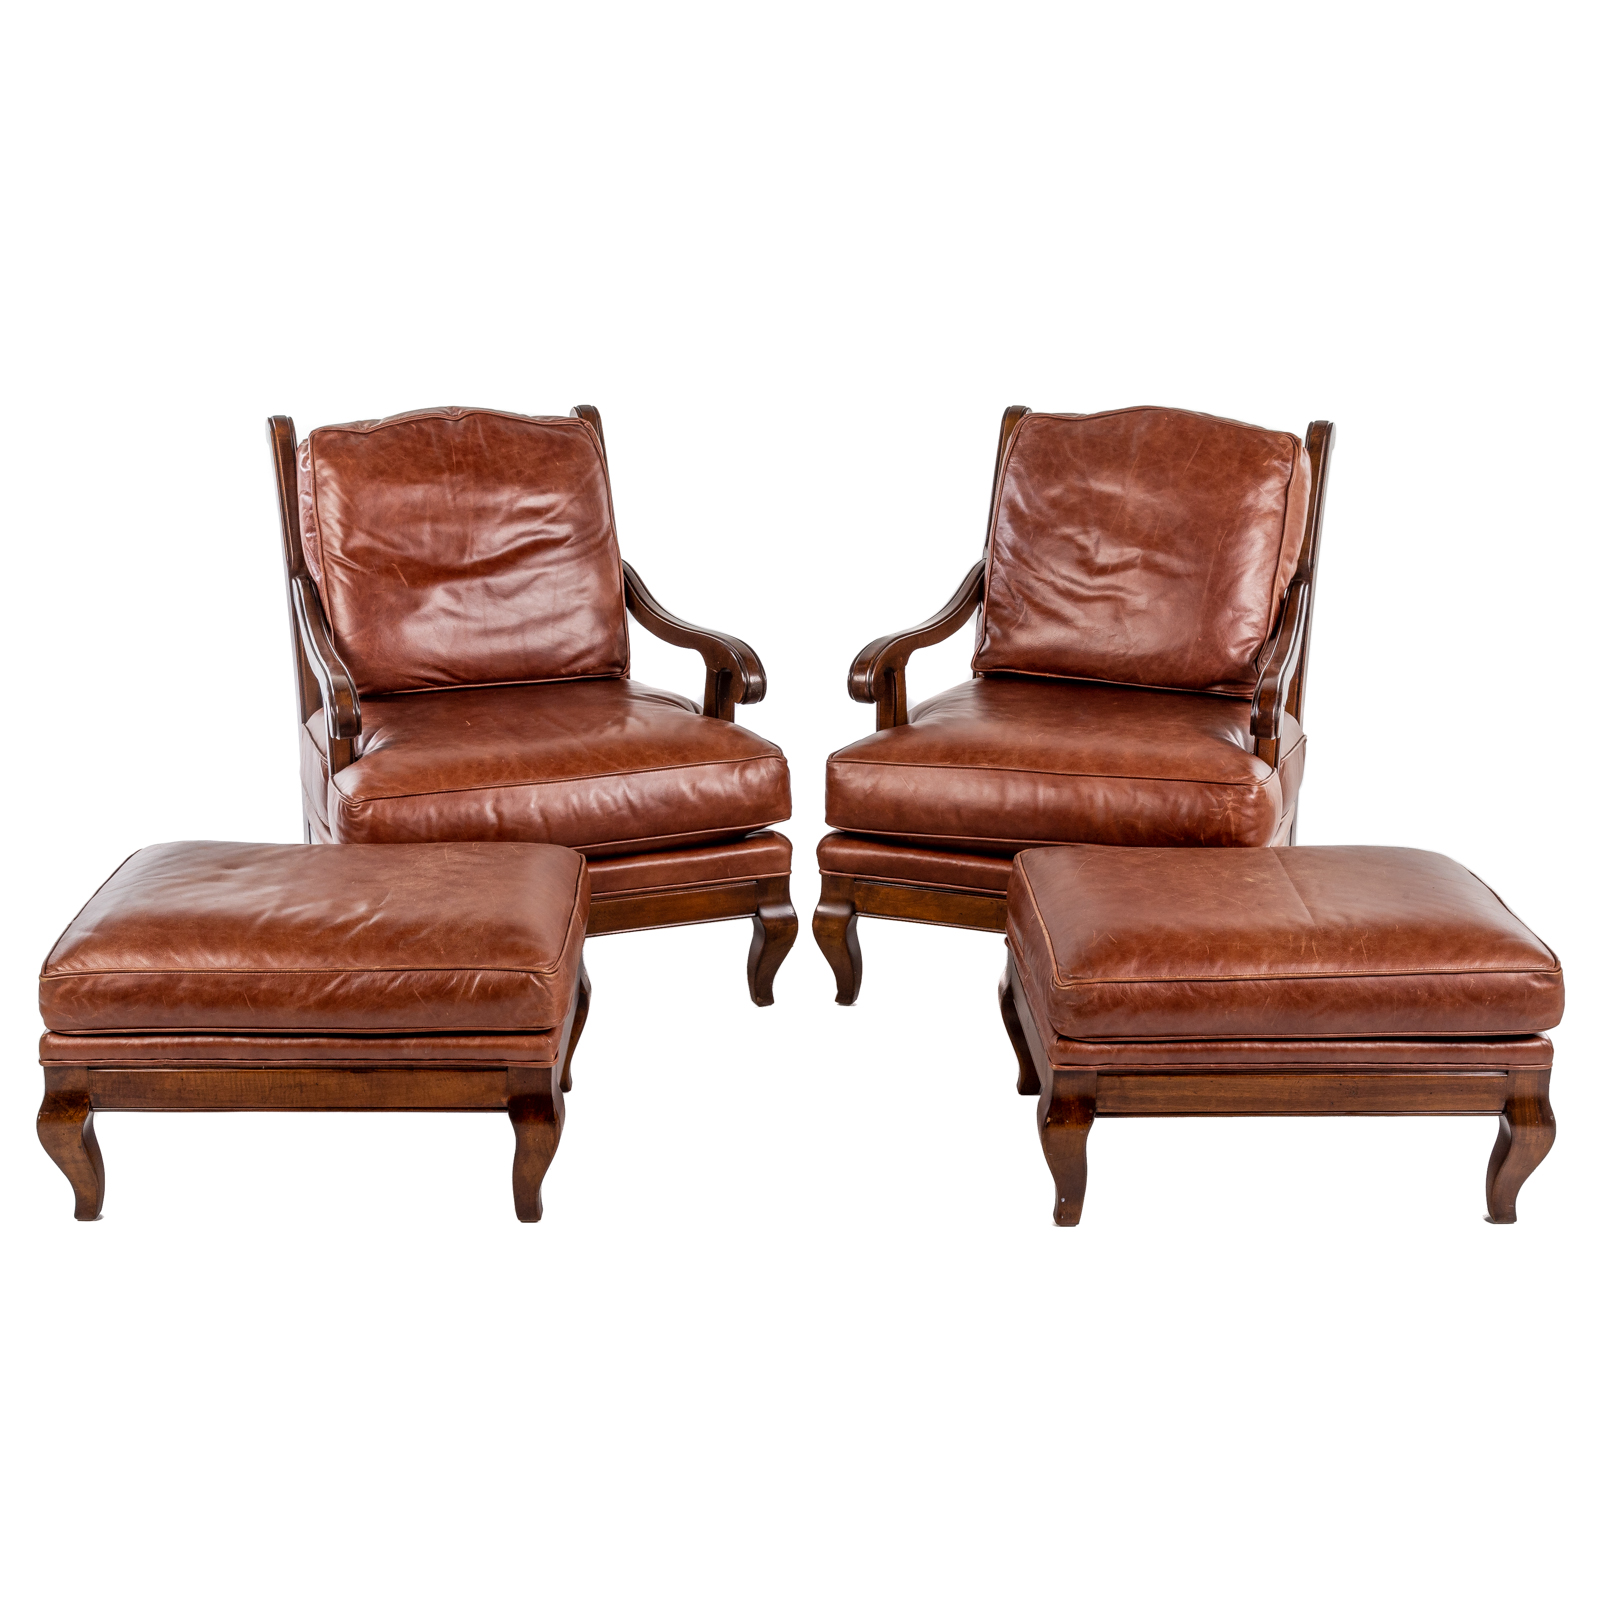 A PAIR OF HICKORY CHAIR LEATHER 36a4a9